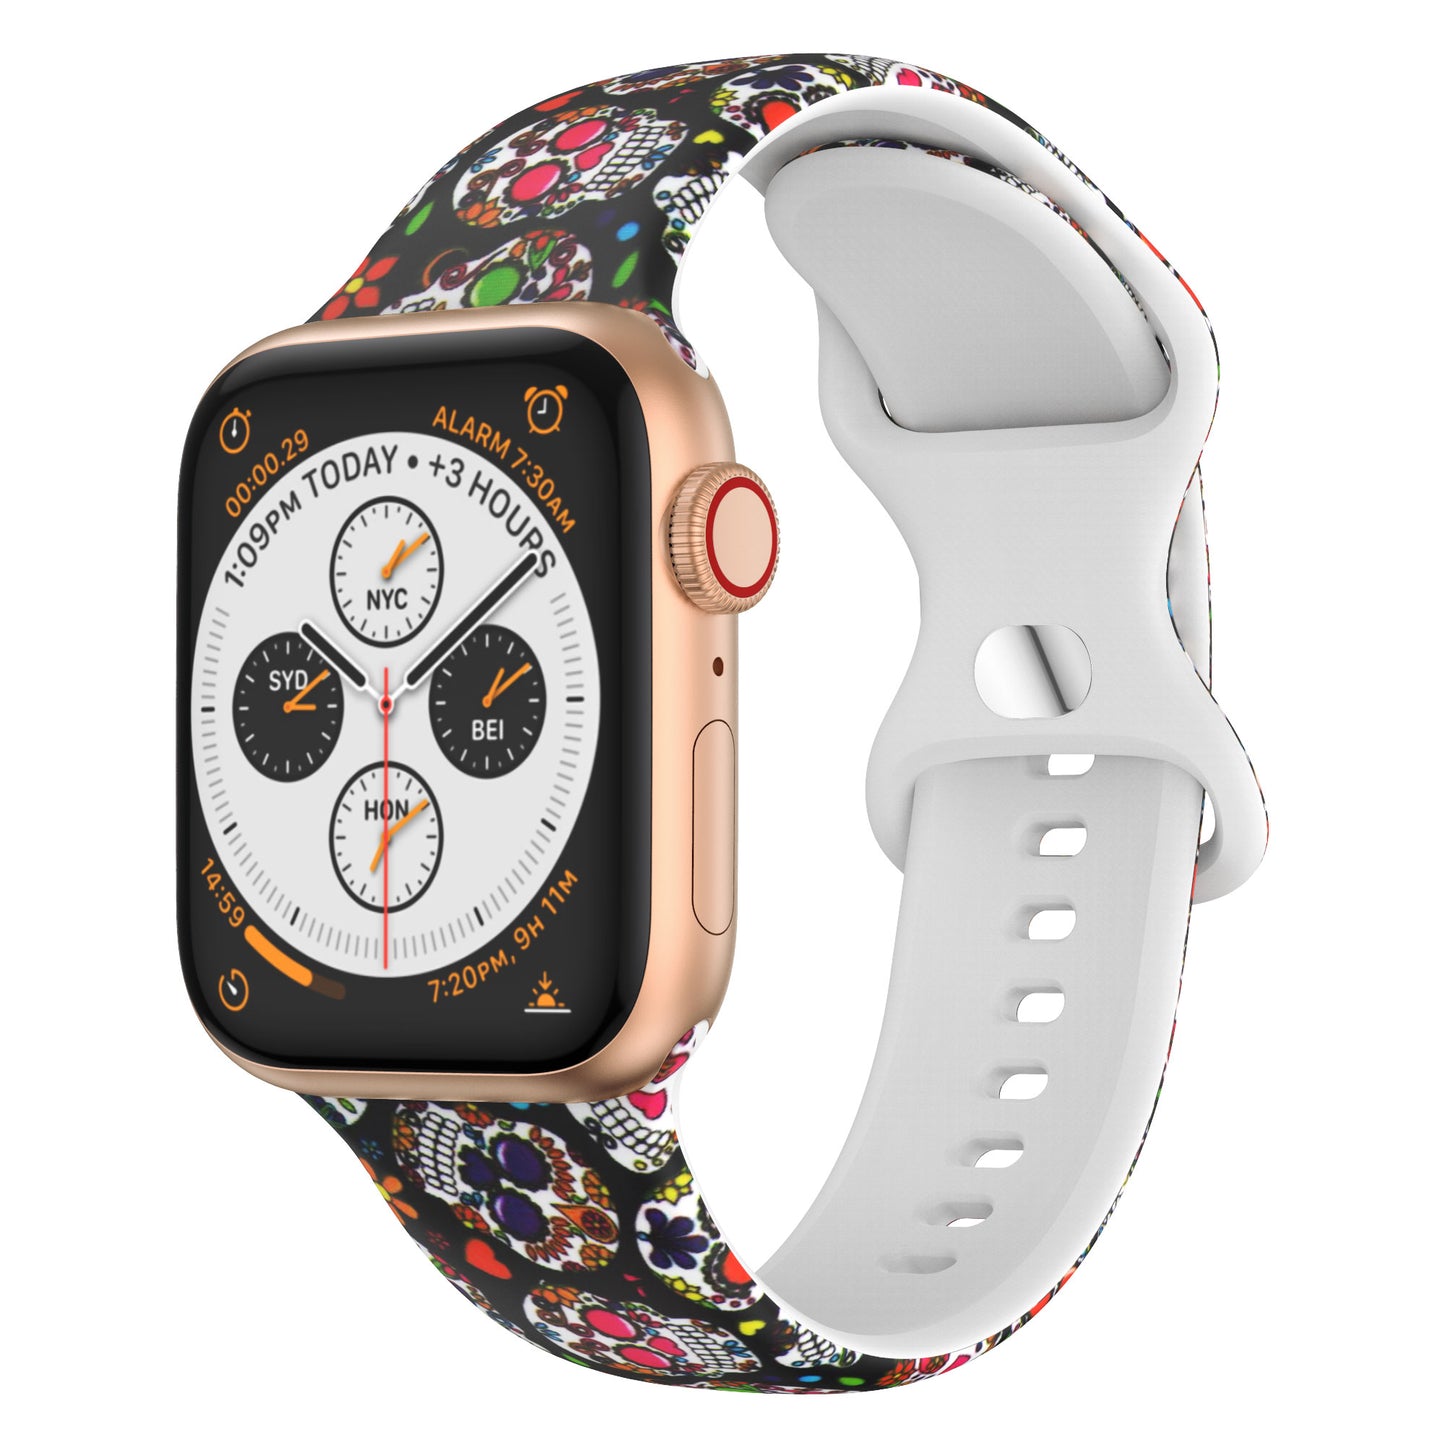 Silicone 8 Buckle Strap | Compatible with Apple Watch 38mm to 42mm